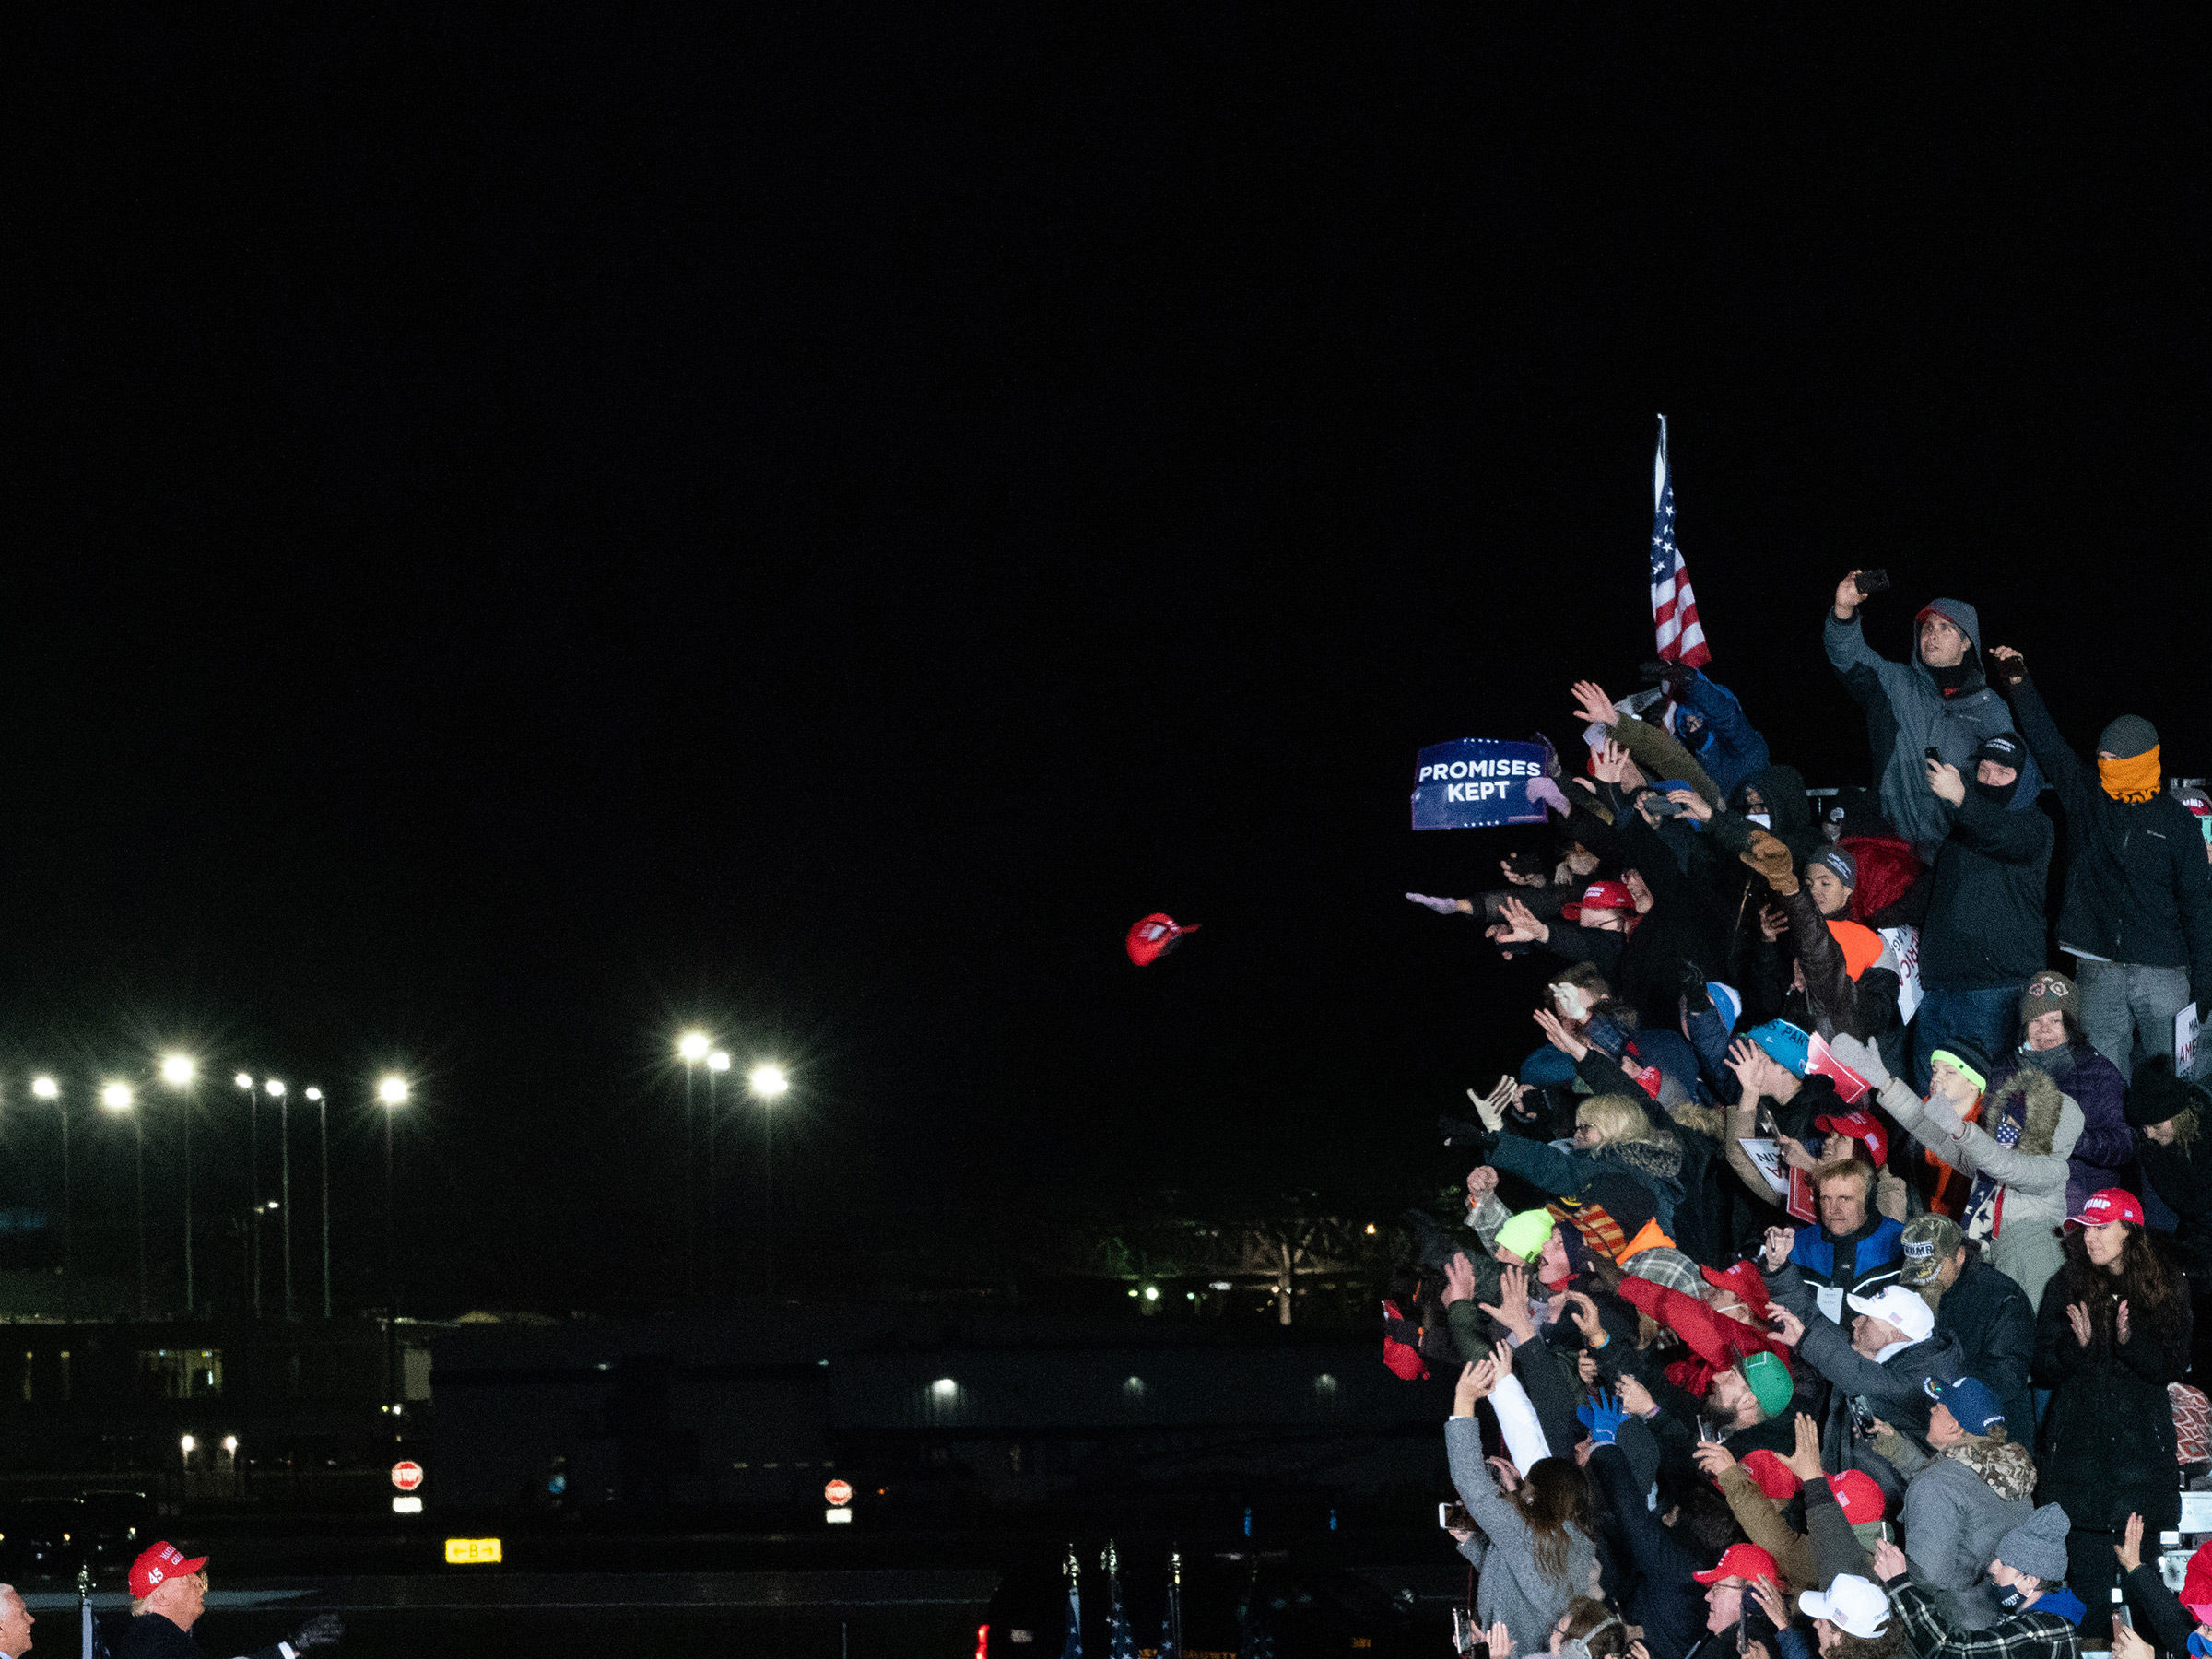 <strong>Grand Rapids, Mich., Nov. 3, 2020.</strong> A hat is tossed between Trump and his supporters at the President's final rally before the election. (Peter van Agtmael—Magnum Photos for TIME)